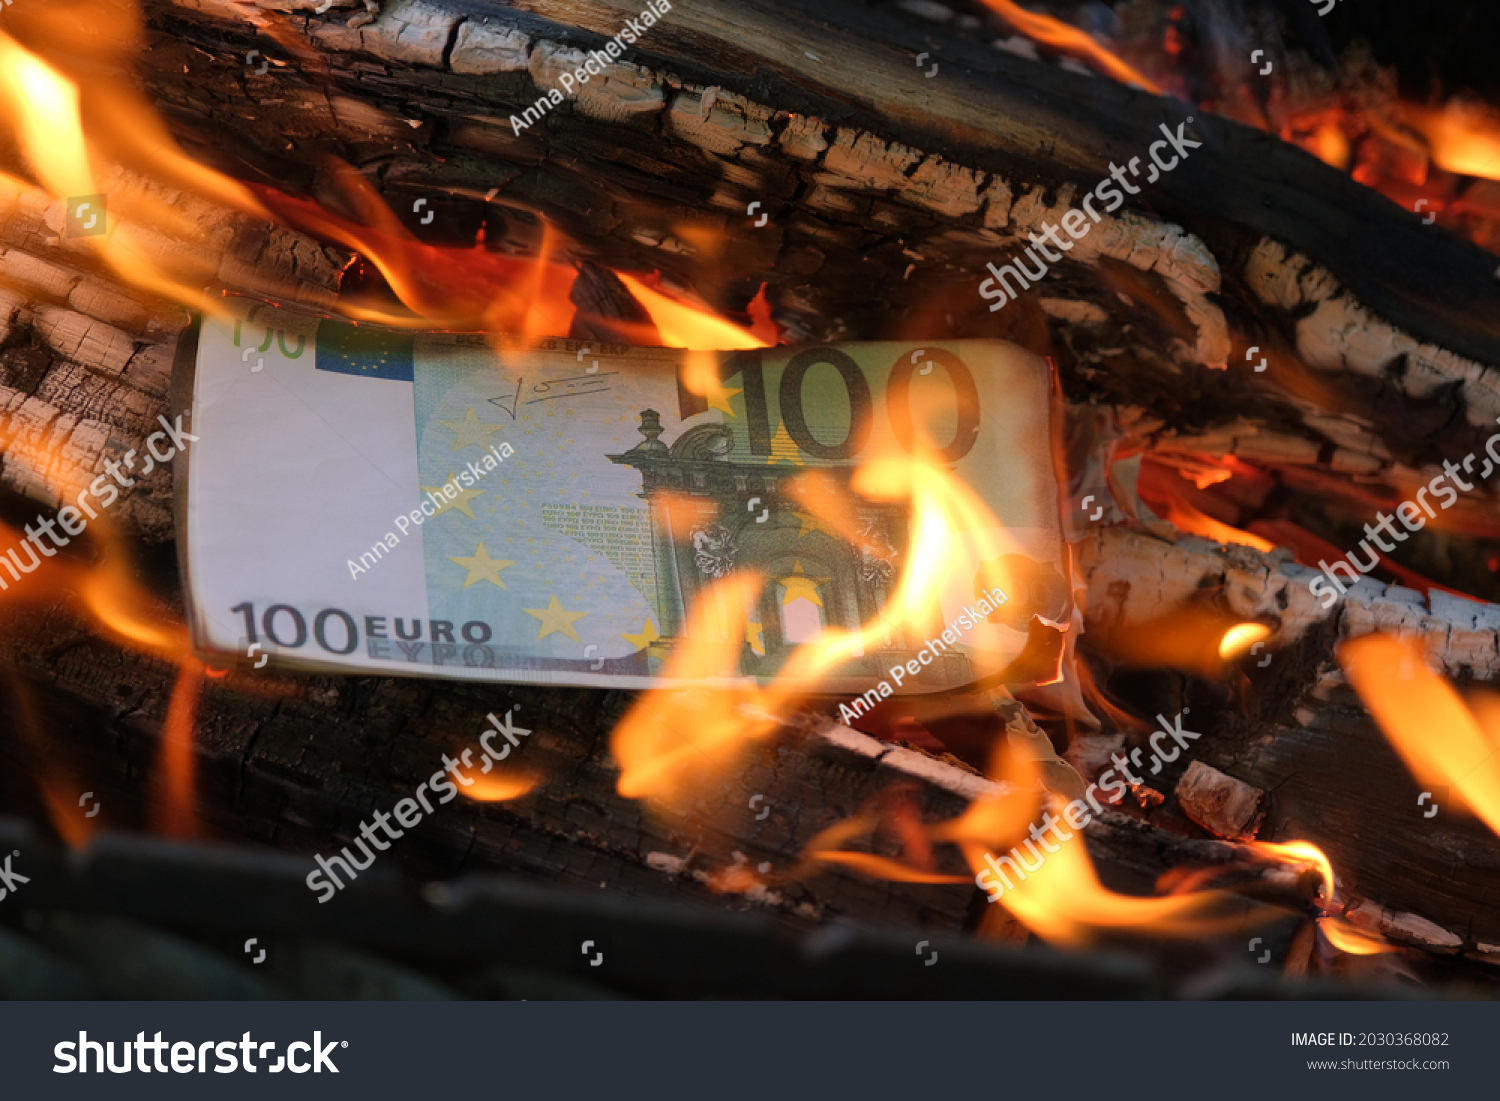 a 100 euro banknote is burning in a flame of fire. Close-up, horizontal photo. Concept - crisis, default, economic decline. #2030368082